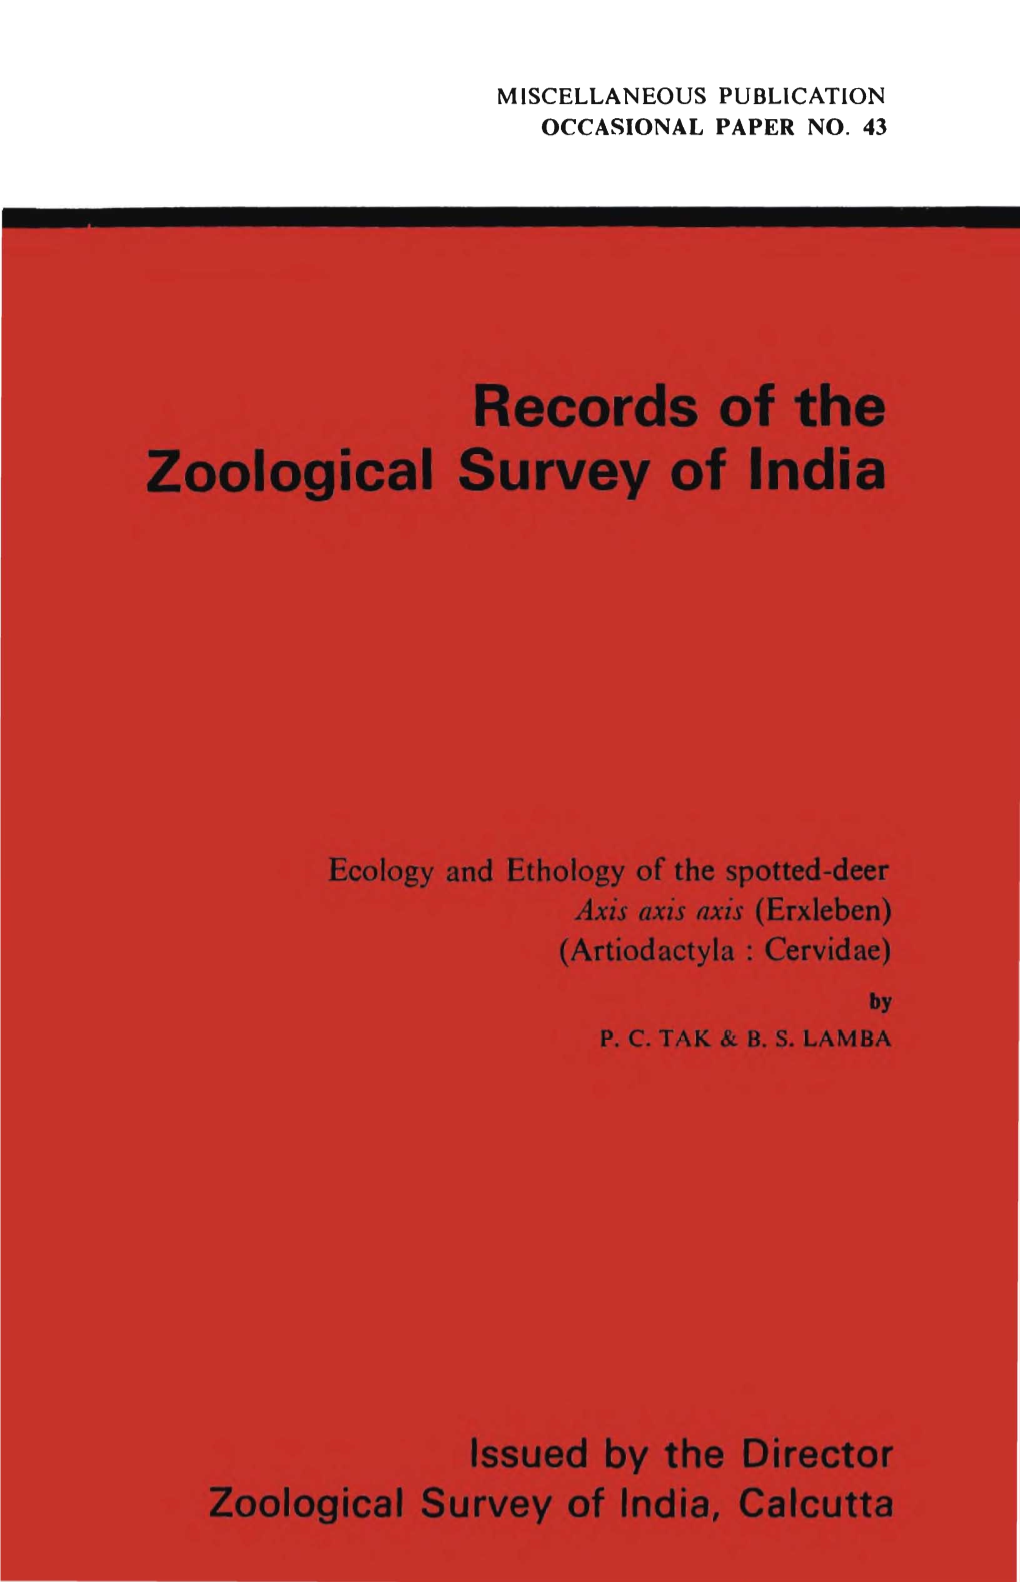 OCCASIONAL PAPER NO. 43 RECORDS of the Zoological Survey of India